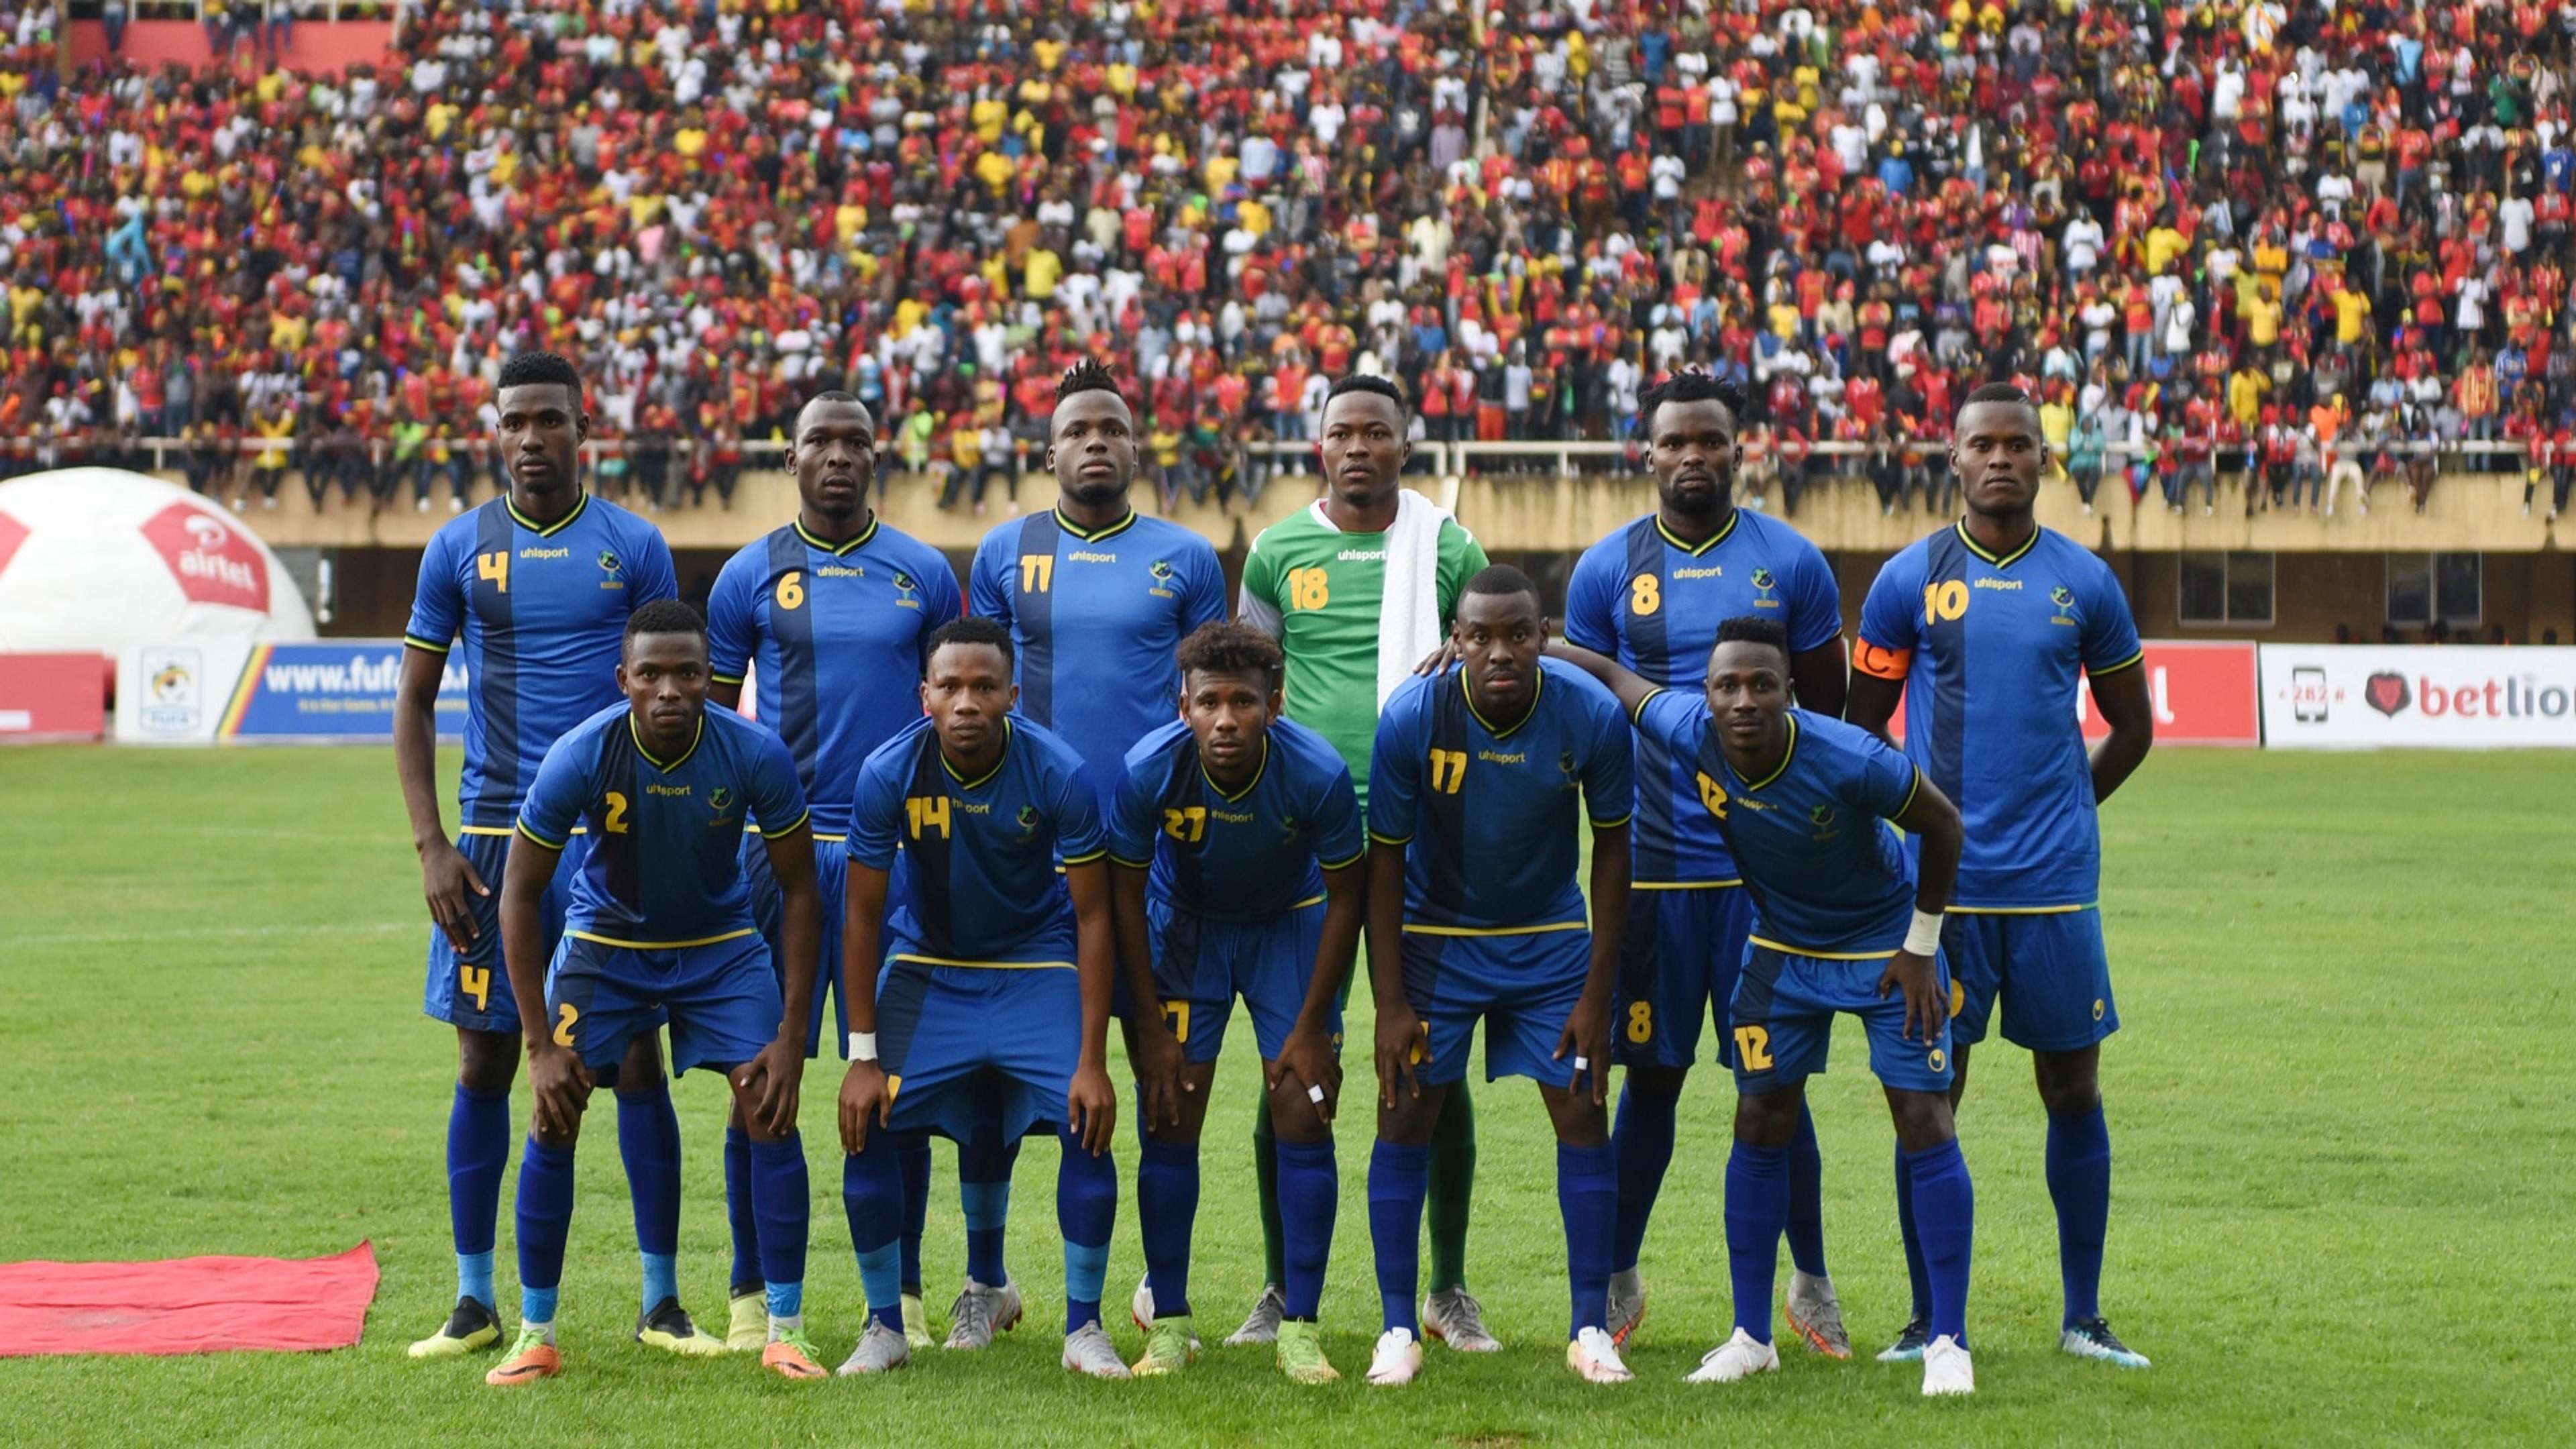 Tanzania get together for a team picture during the 2019 Afcon Qualifiers against Uganda on 08 September 2018 at Mandela Stadium, Namboole, Kampala